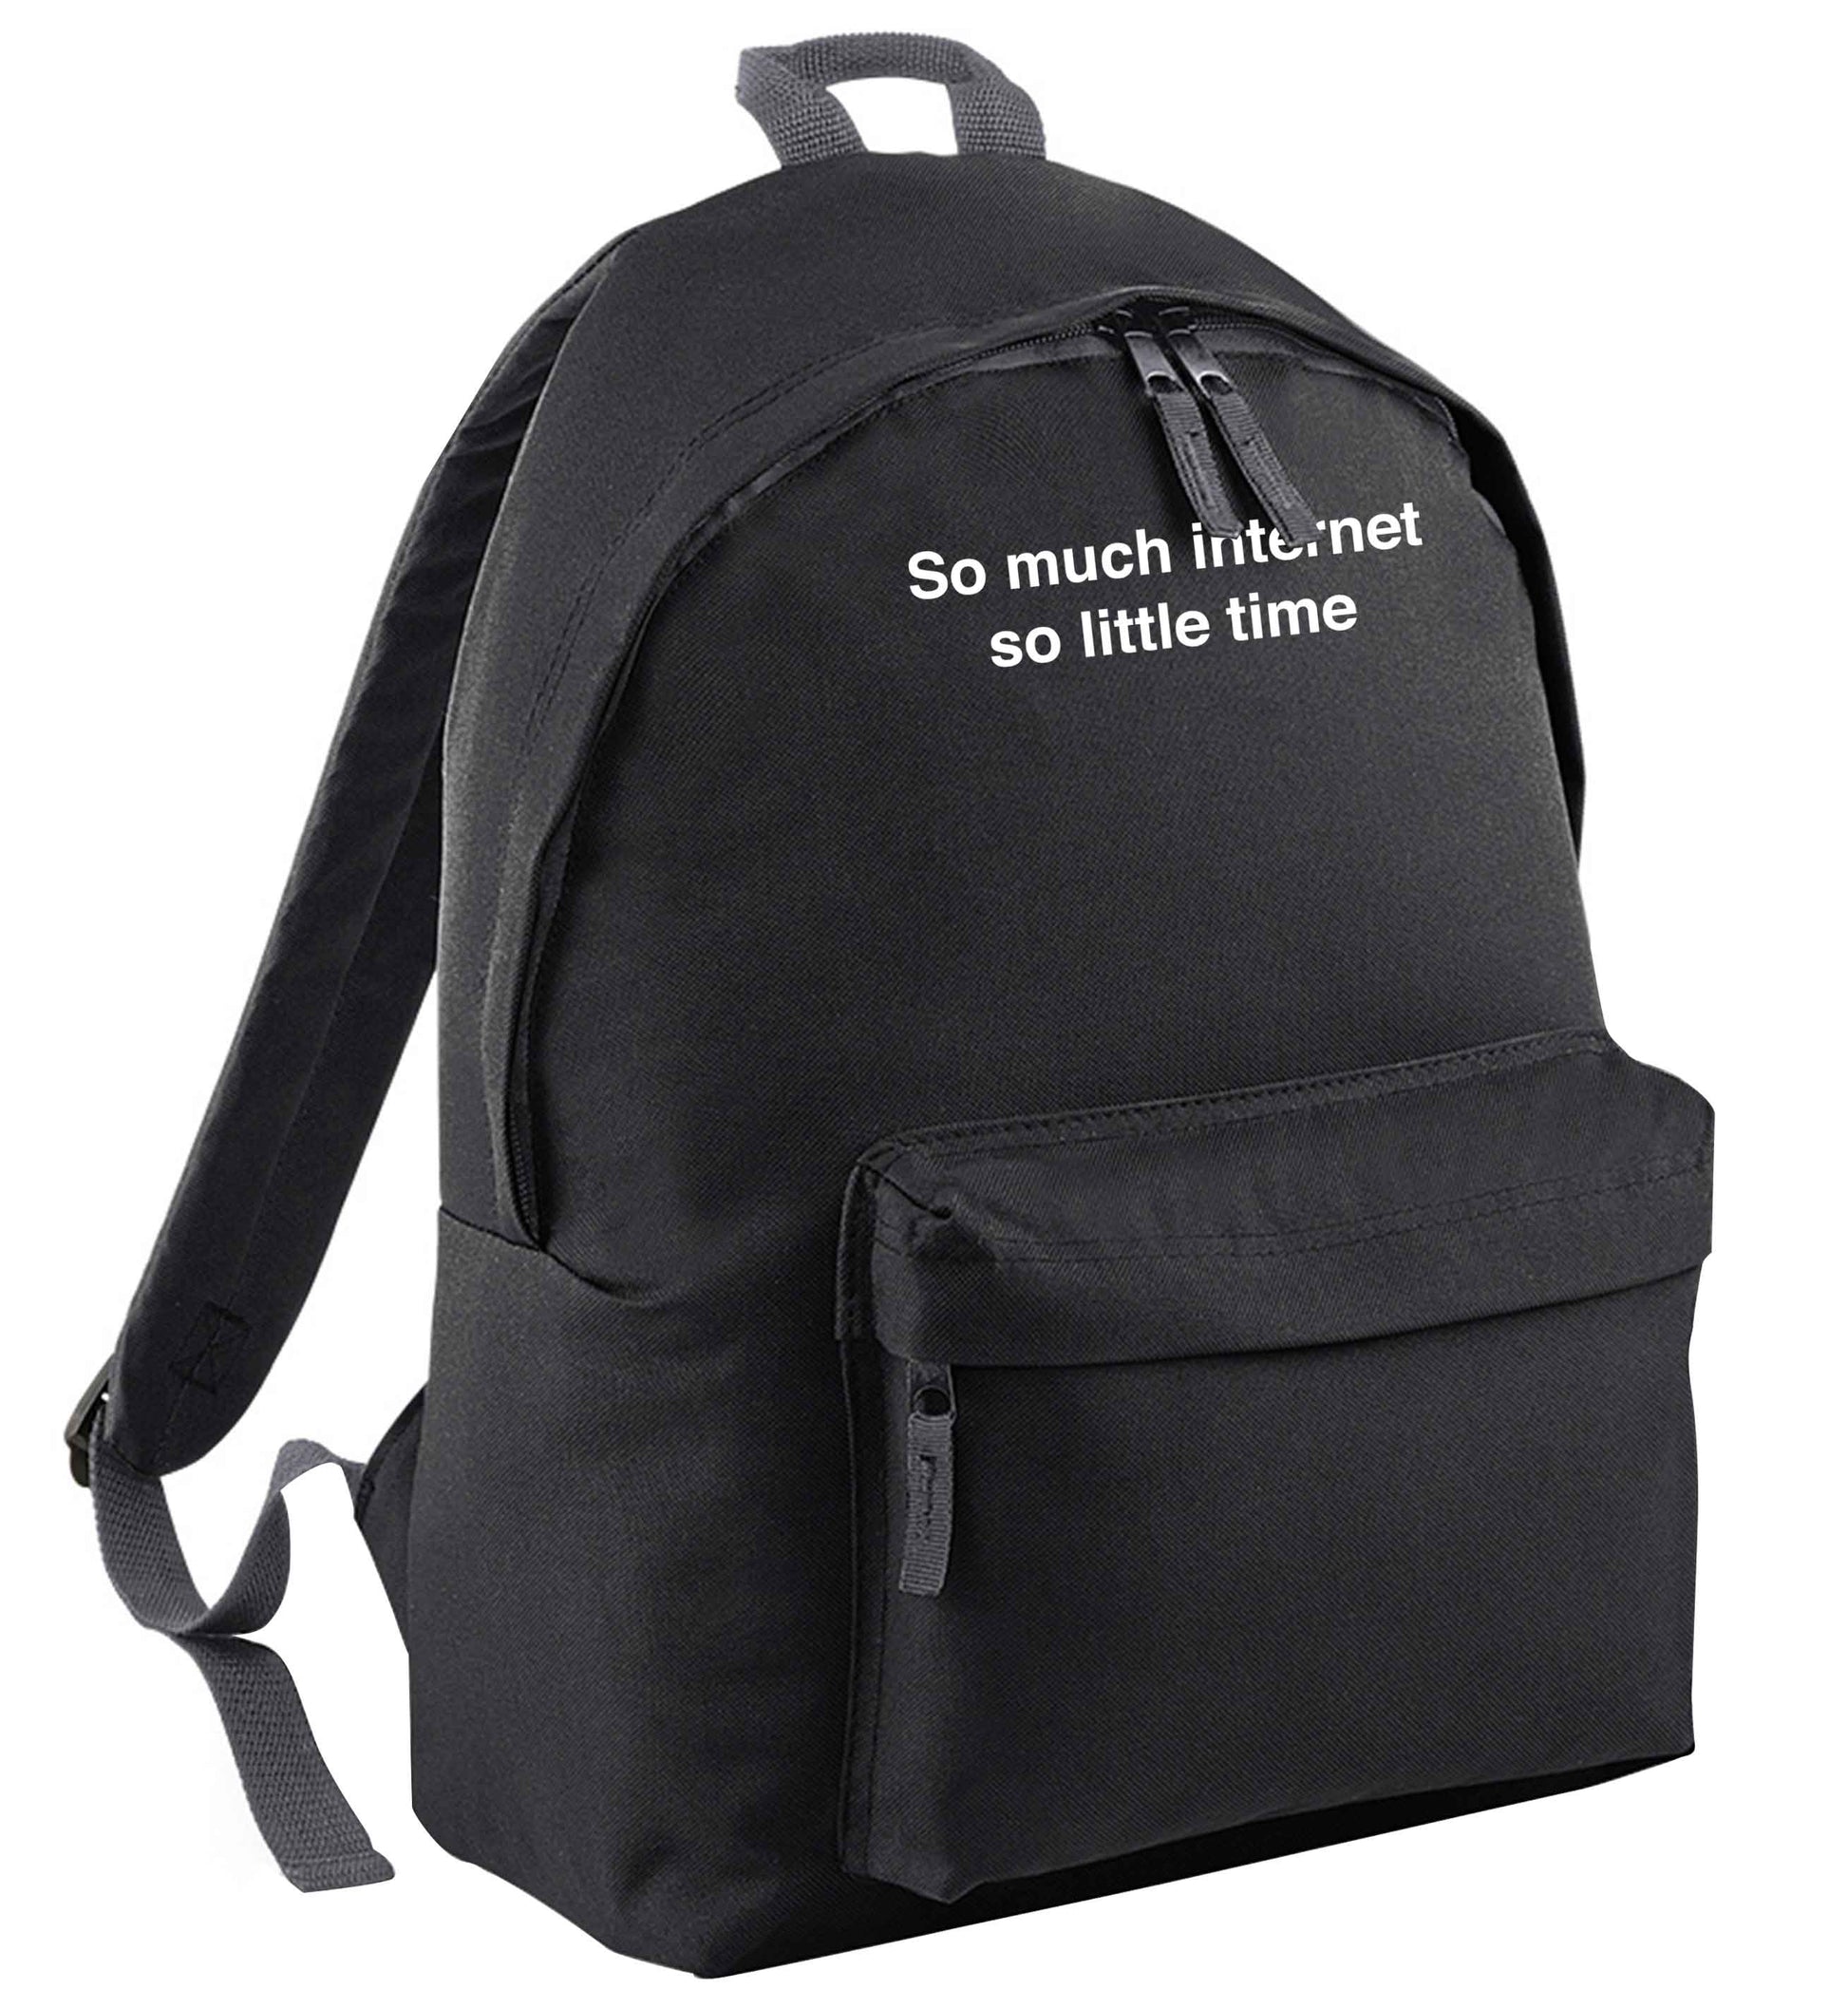 So much internet so little time black adults backpack